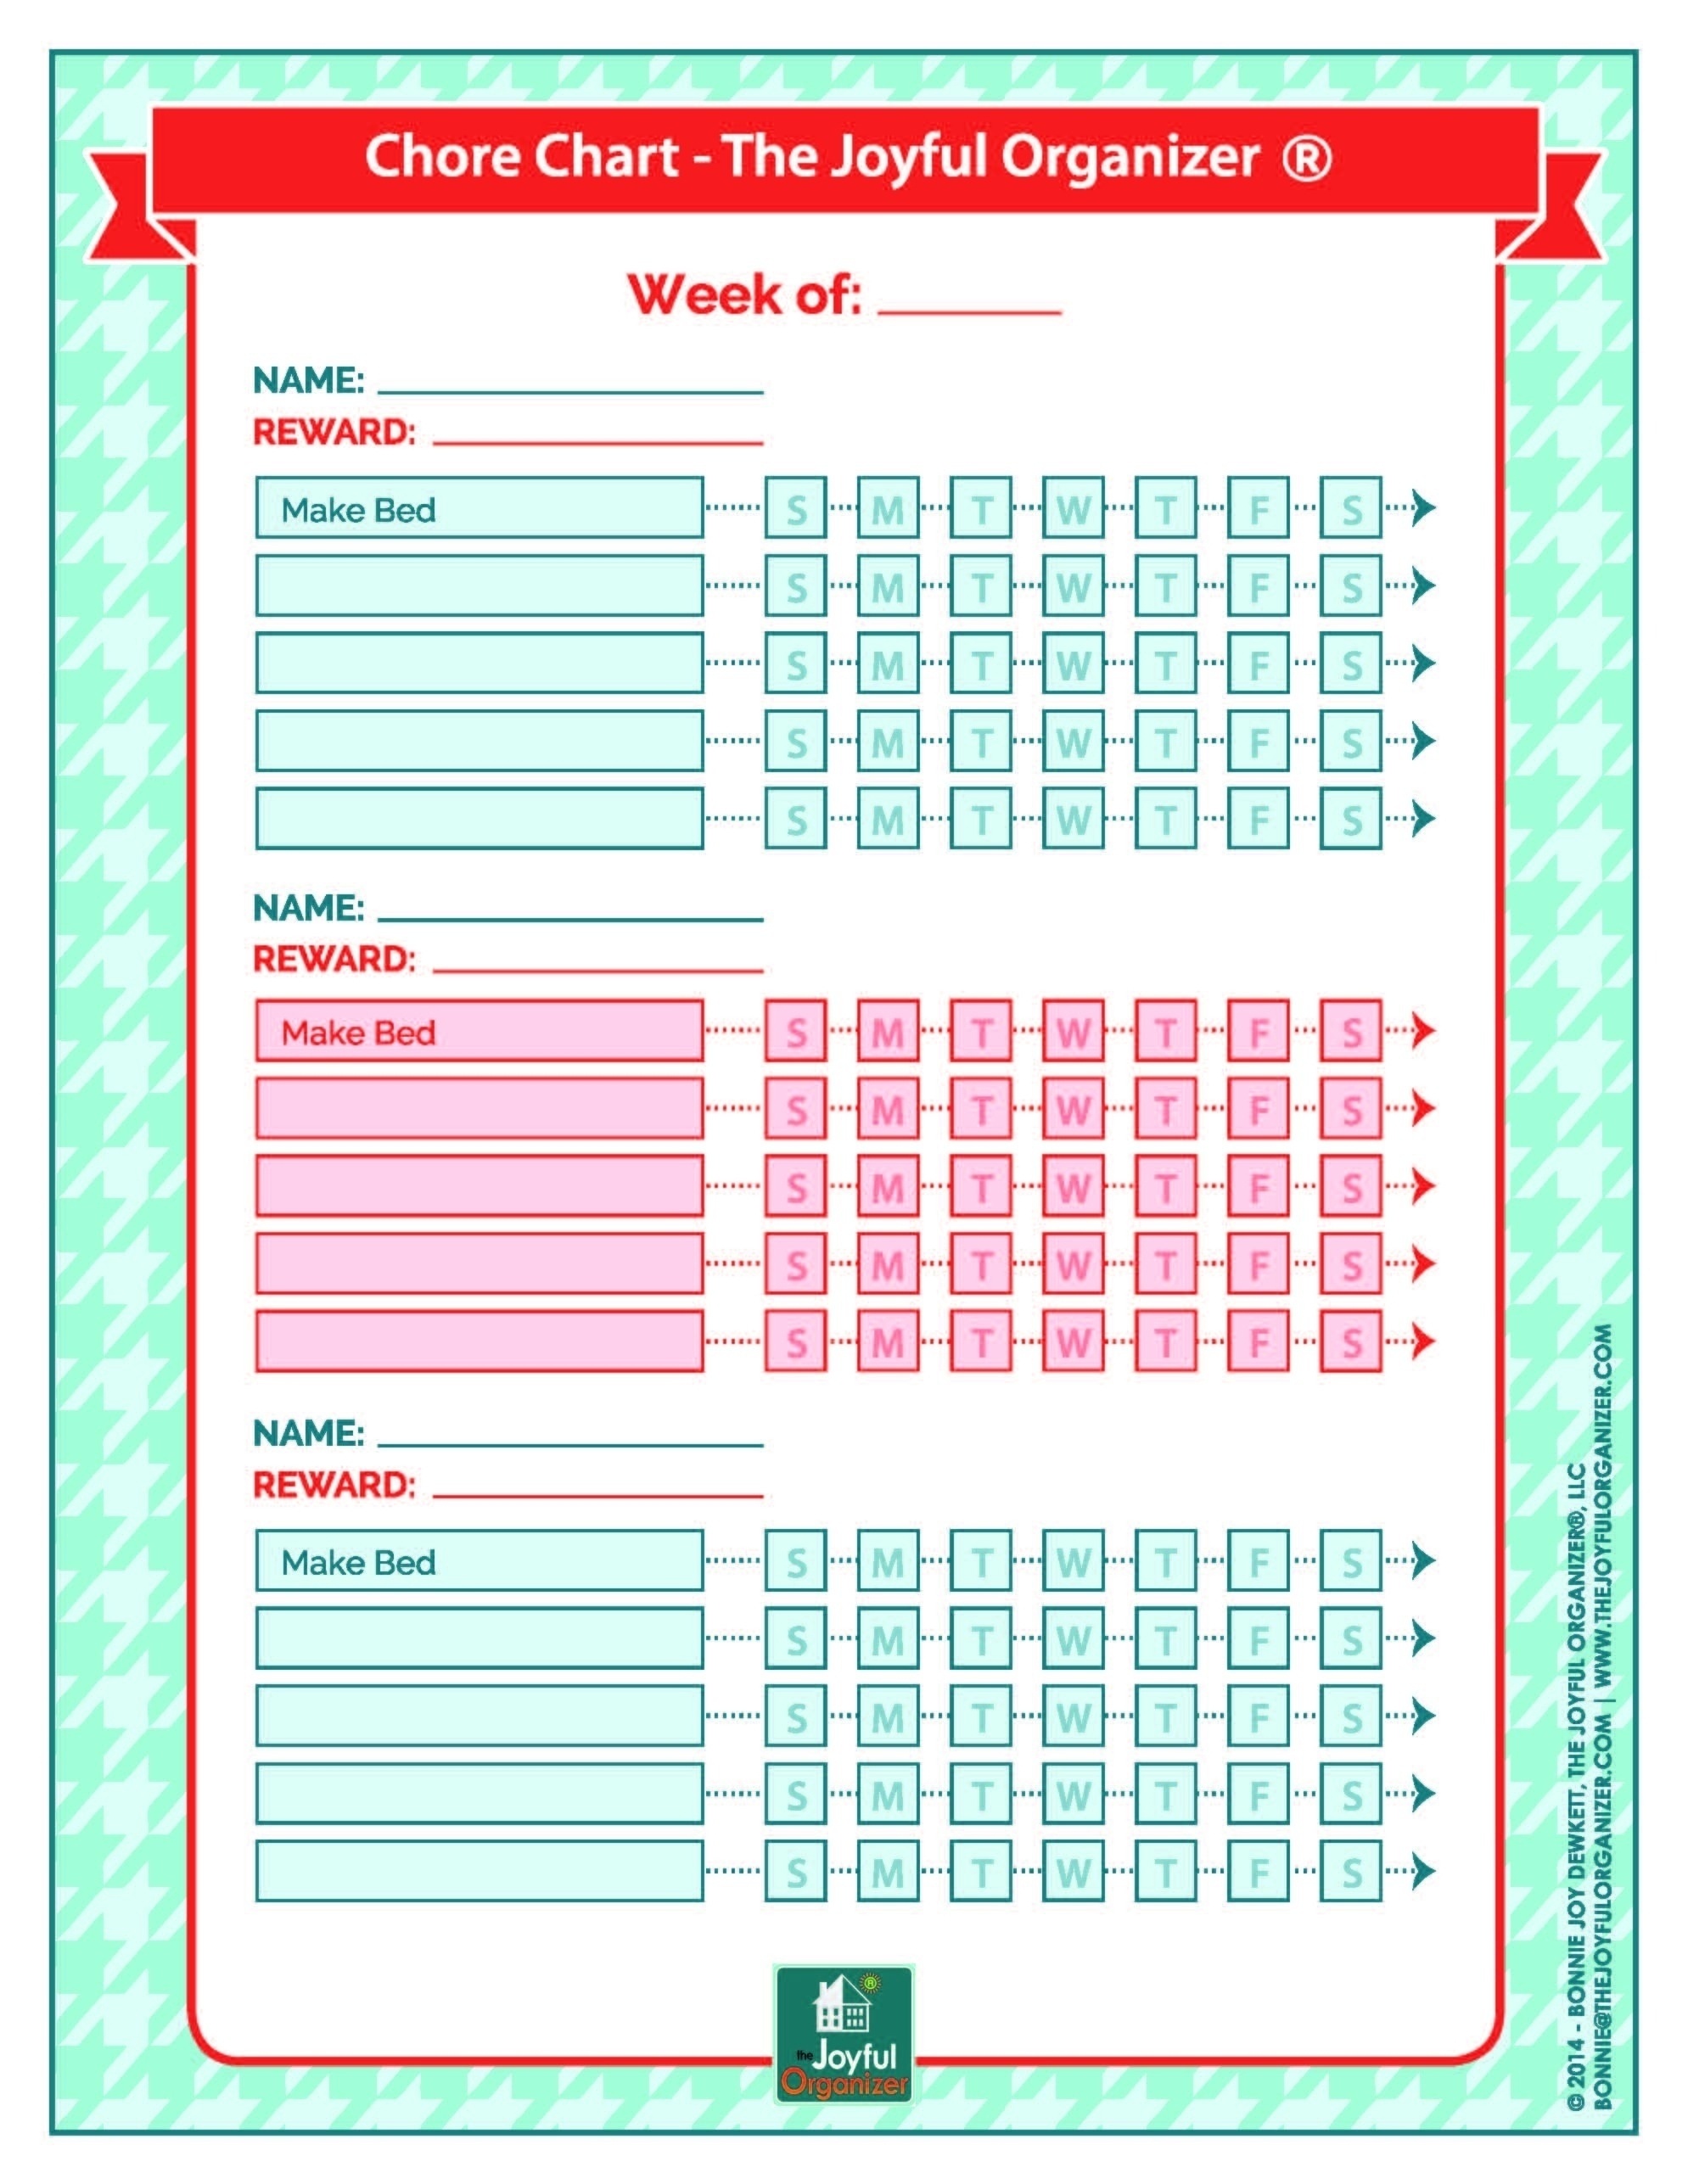 Free Printable Chore Charts For Multiple Children | Chart And - Free Printable Chore Charts For Multiple Children